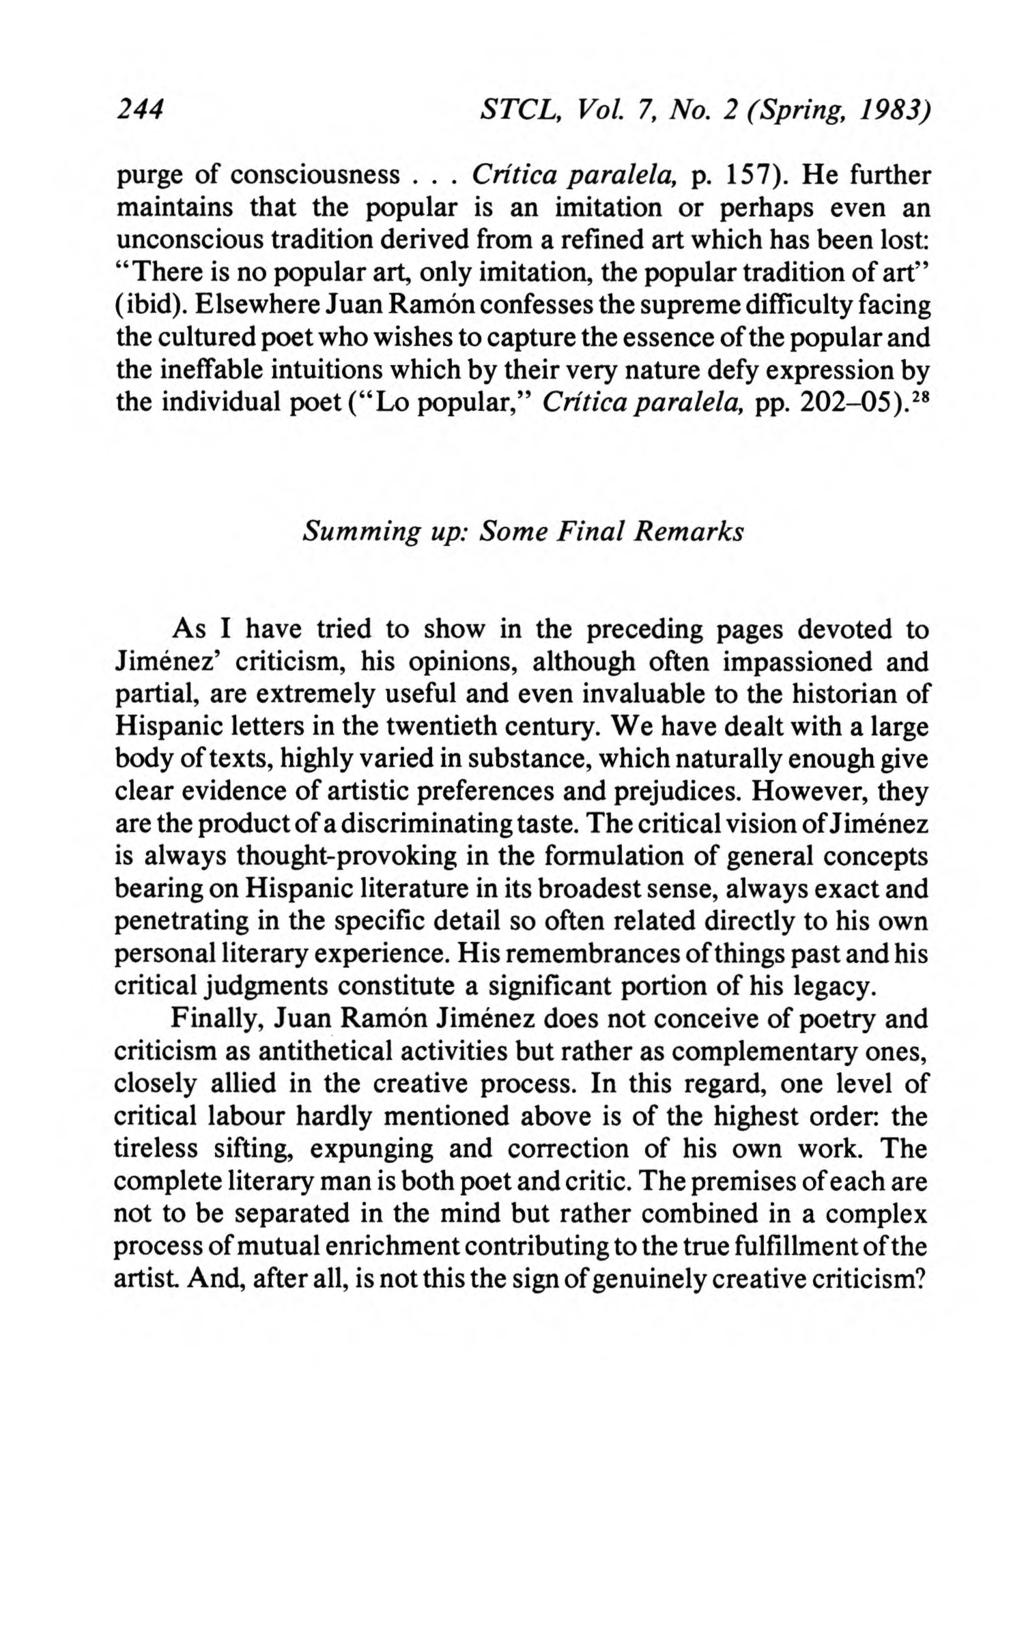 Studies in 20th & 21st Century Literature, Vol. 7, Iss. 2 [1983], Art. 9 244 STCL, Vol. 7, No. 2 (Spring, 1983) purge of consciousness... Critica paralela, p. 157).